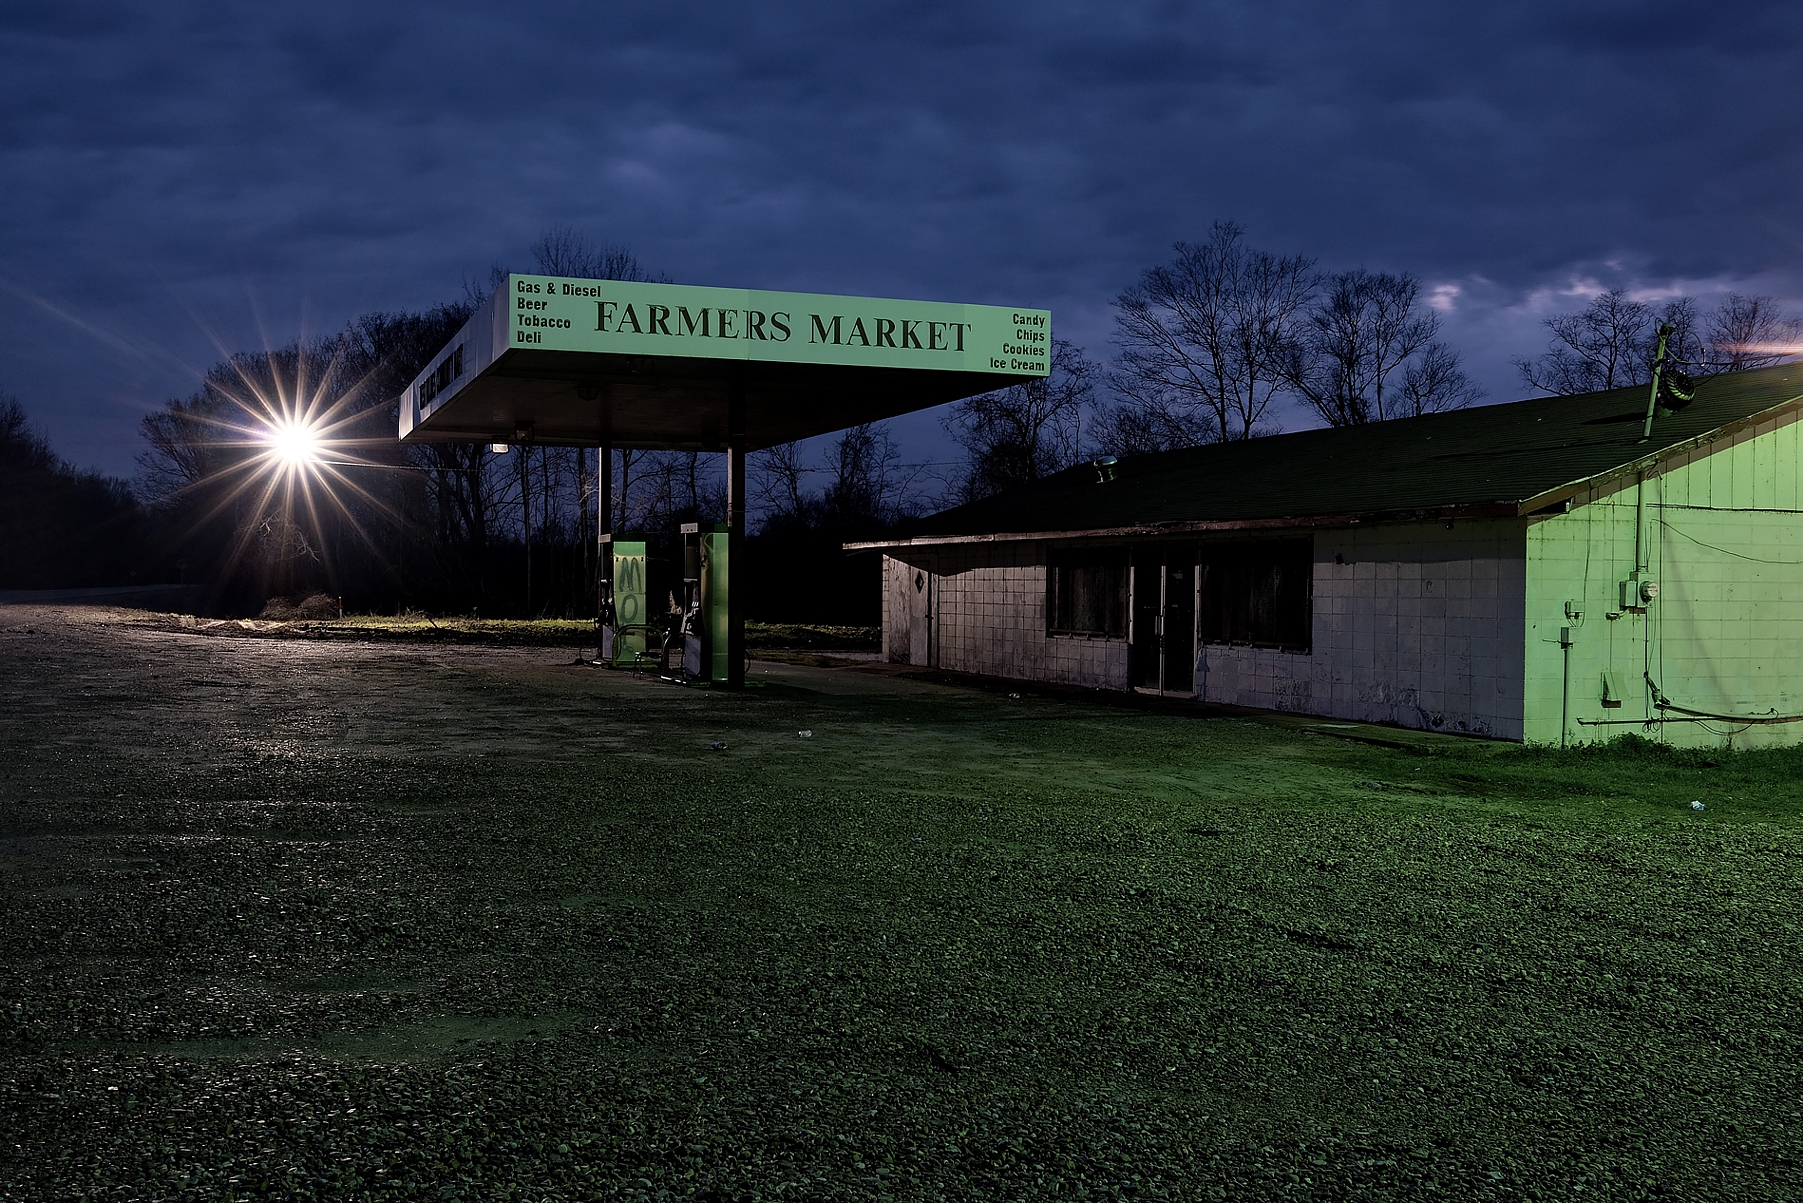  Farmers Market at the intersection of Hwy 49W/12 and Epps Road - Mileston community about 6 miles south of Tchula, MS 